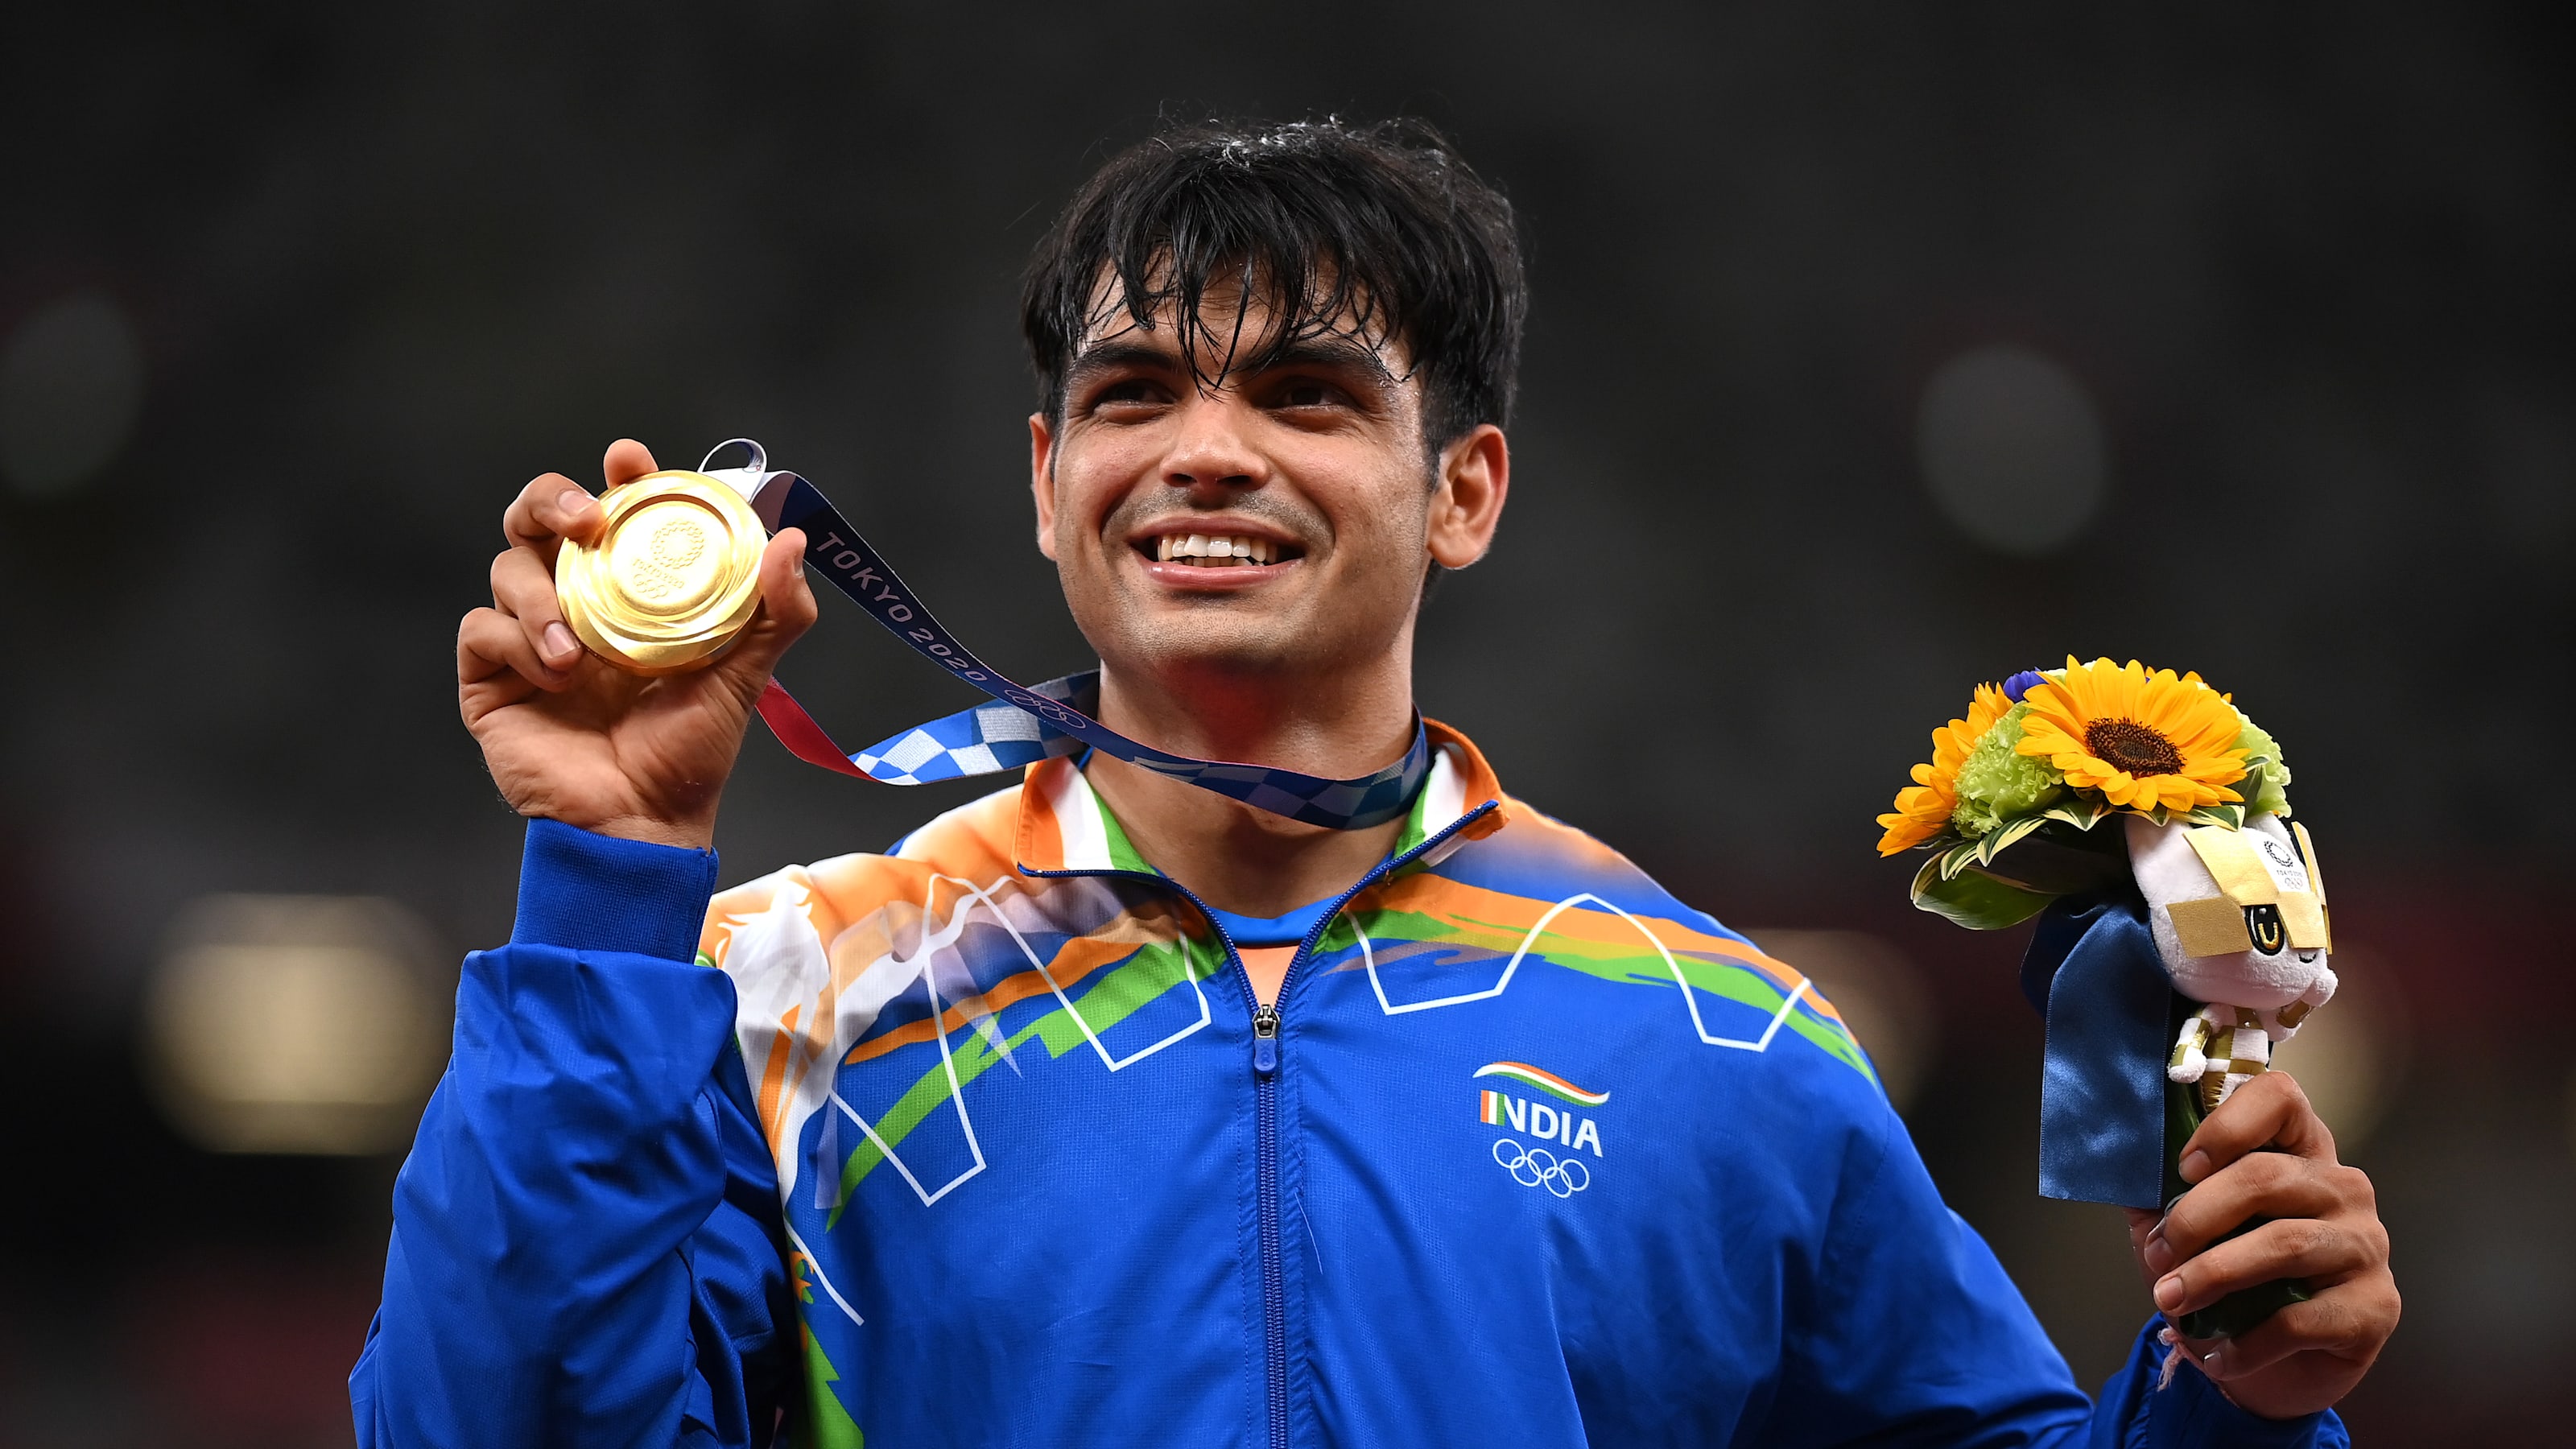 How medals has India won in Olympics?